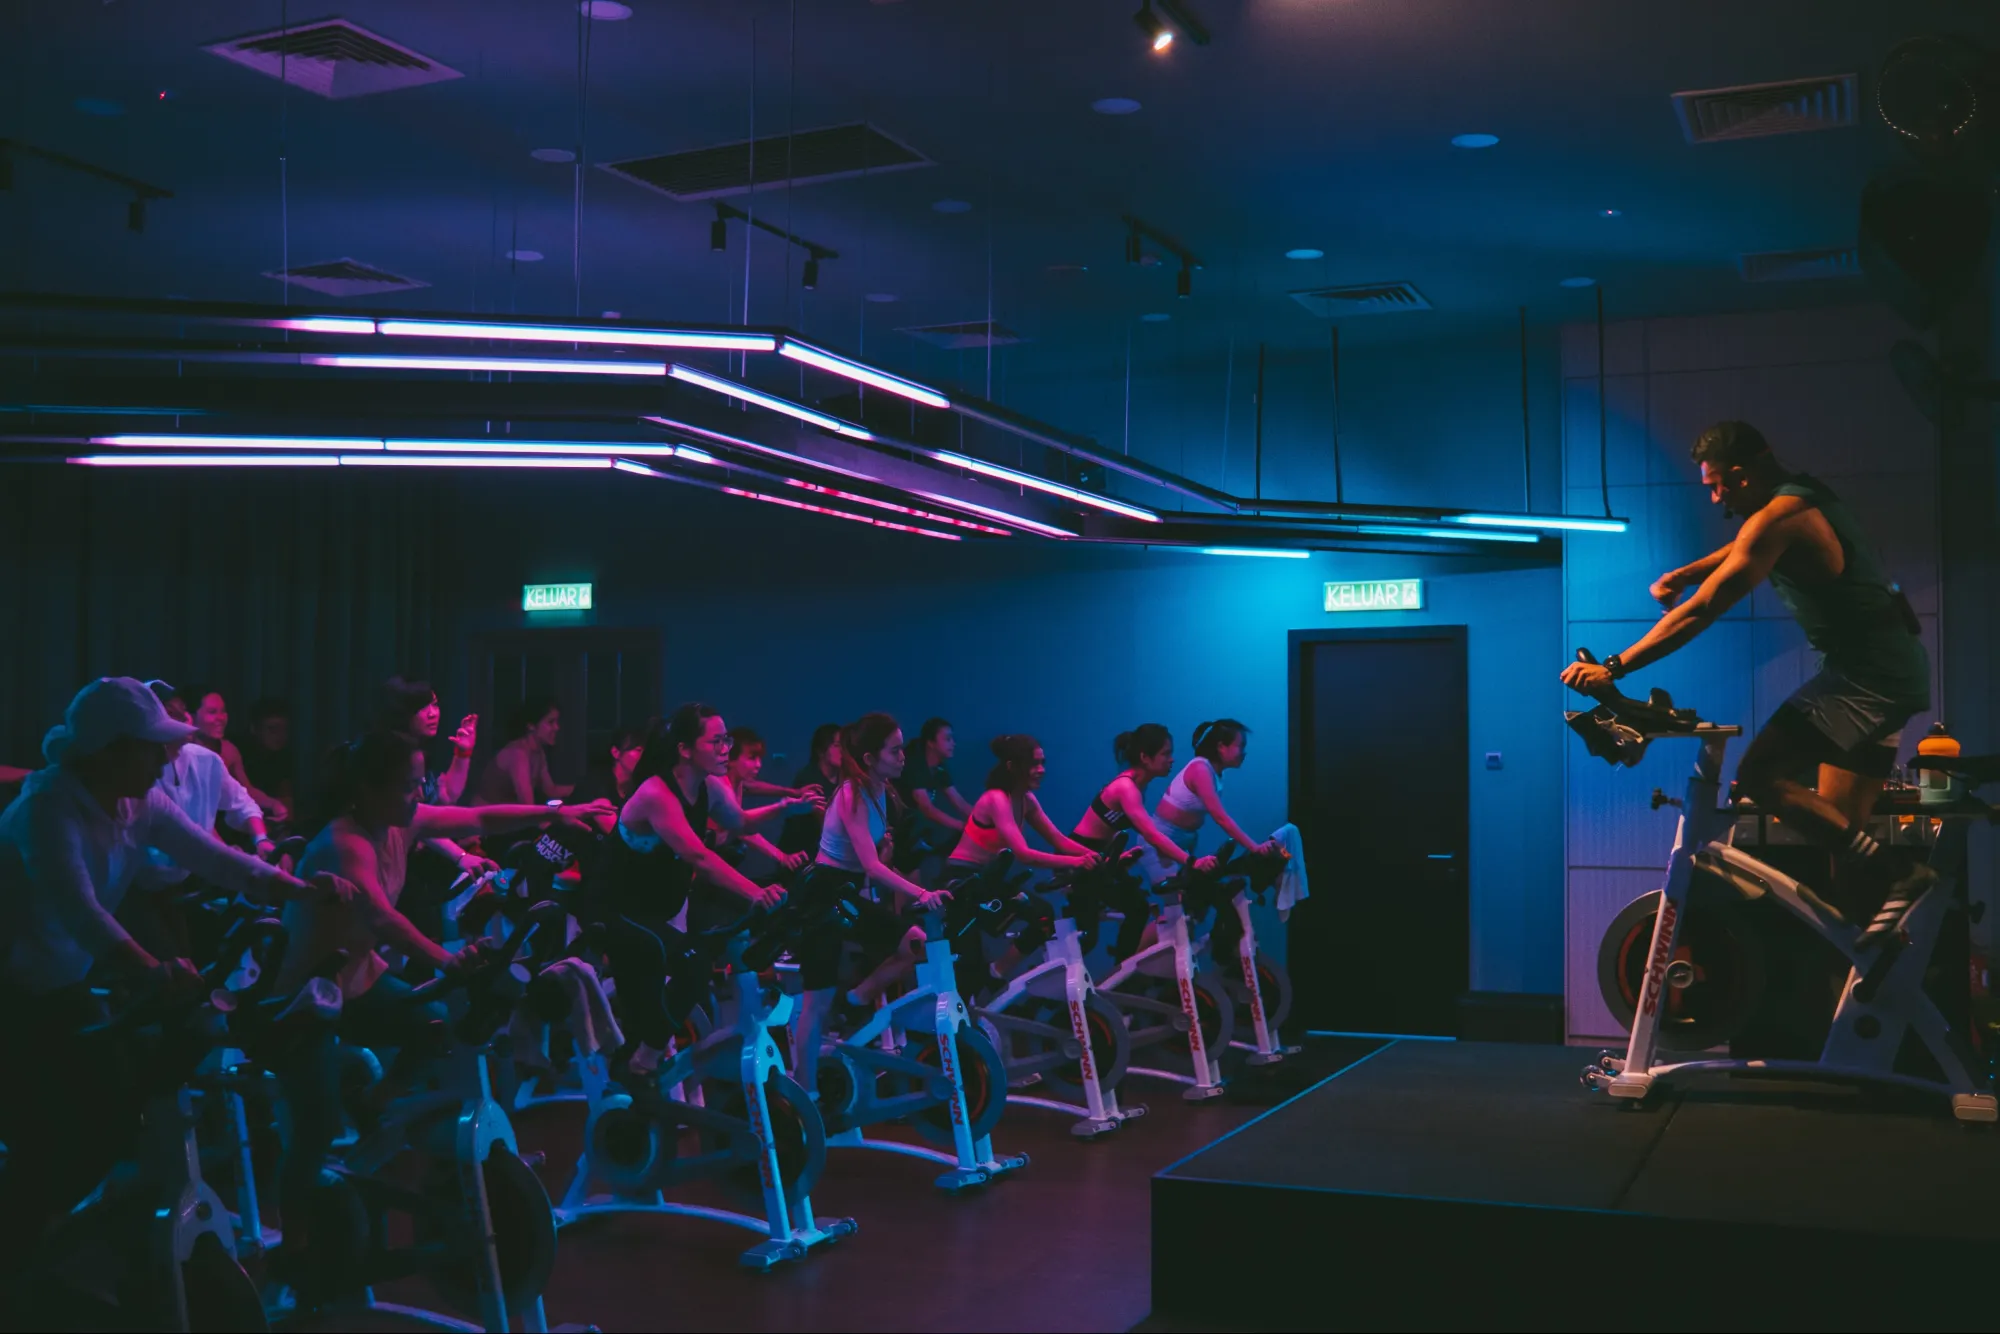 On Curating Experience - The Aesthetics of Work, Indoor Cycling Lesson and CX Business Class